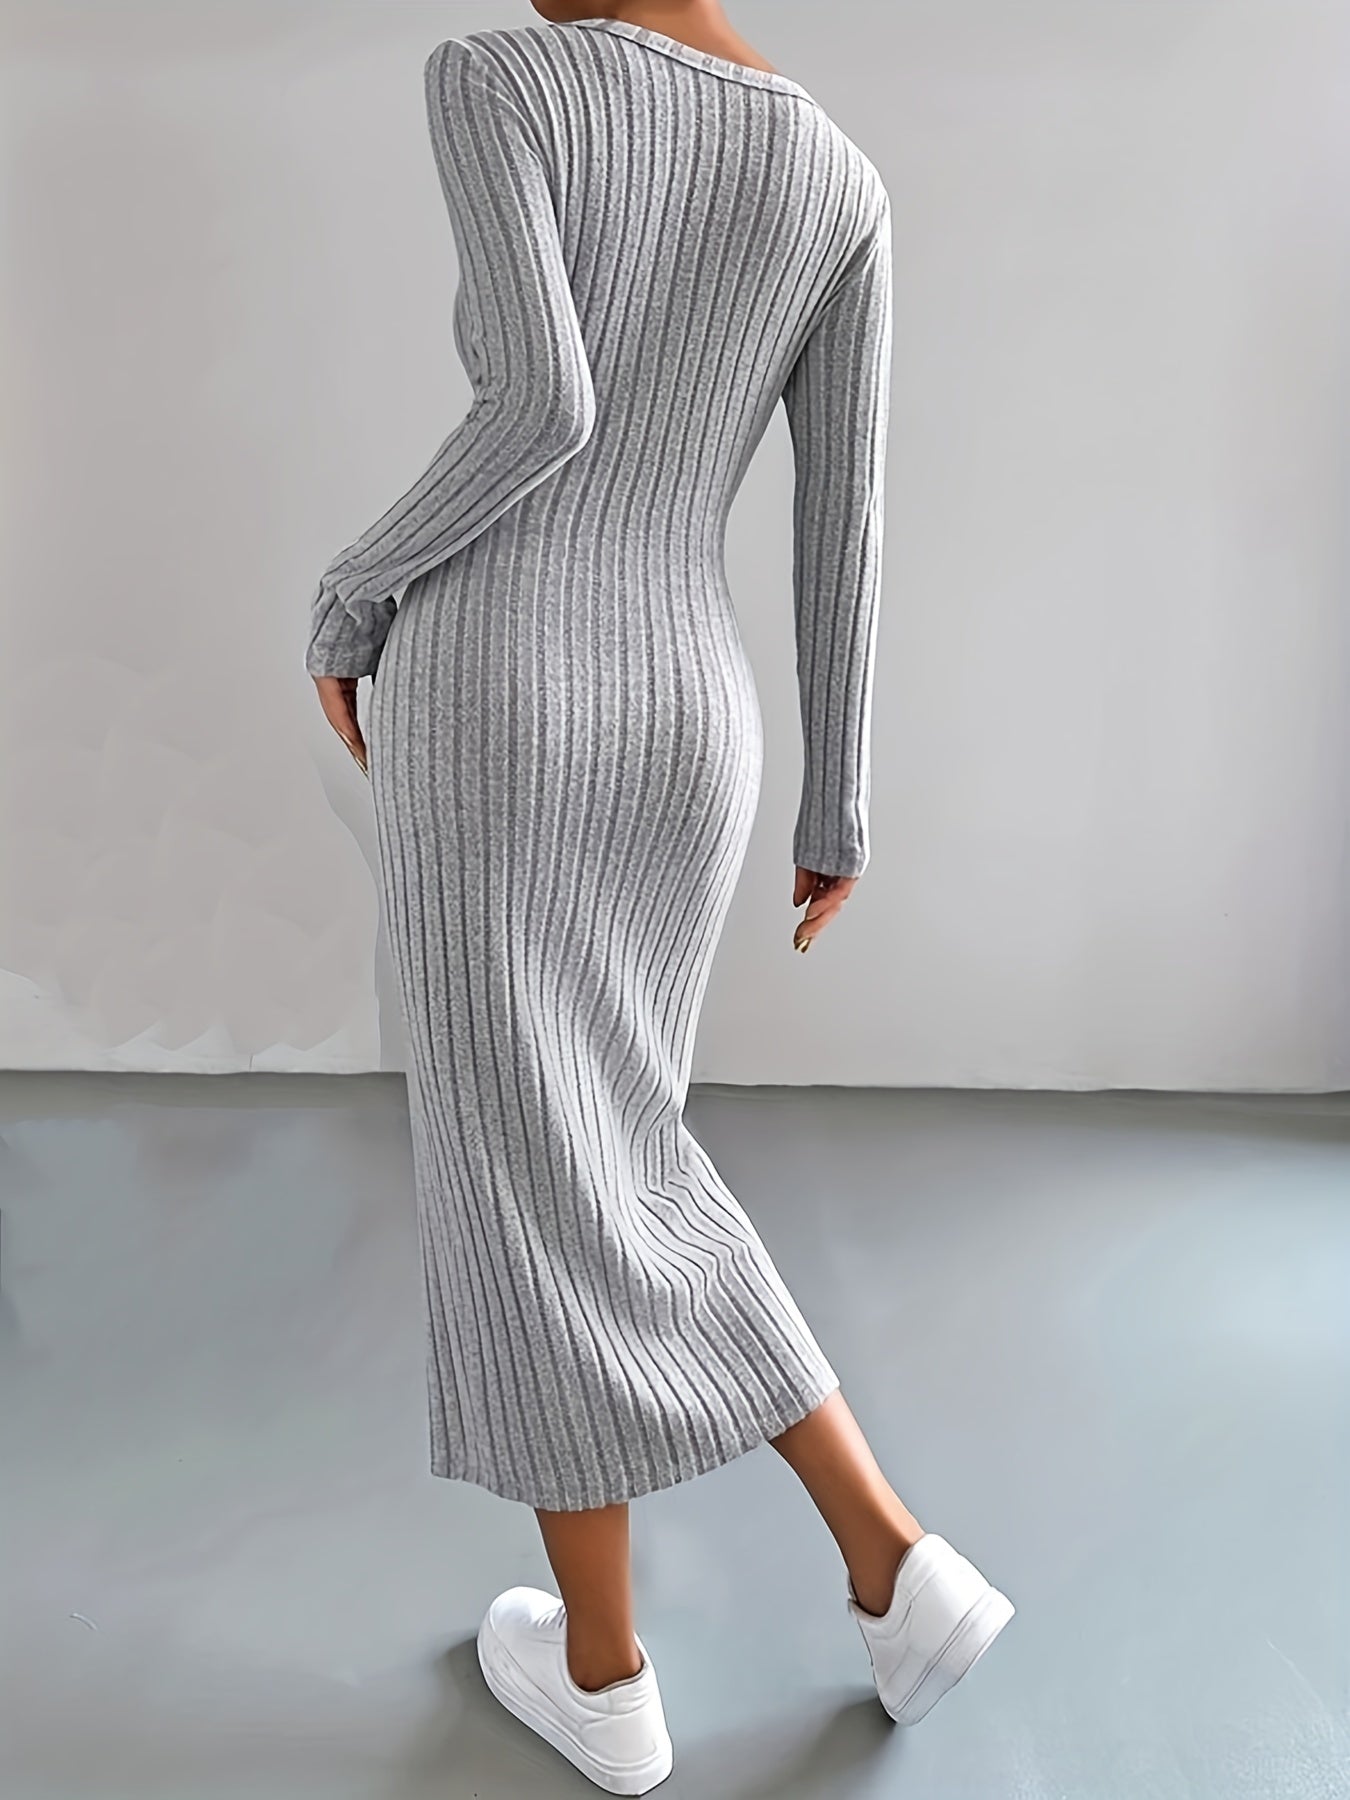 Plus Size Casual Sweater Dress, Women's Plus Solid Ribbed Button Up Long Sleeve V Neck Medium Stretch Slim Fit Dress